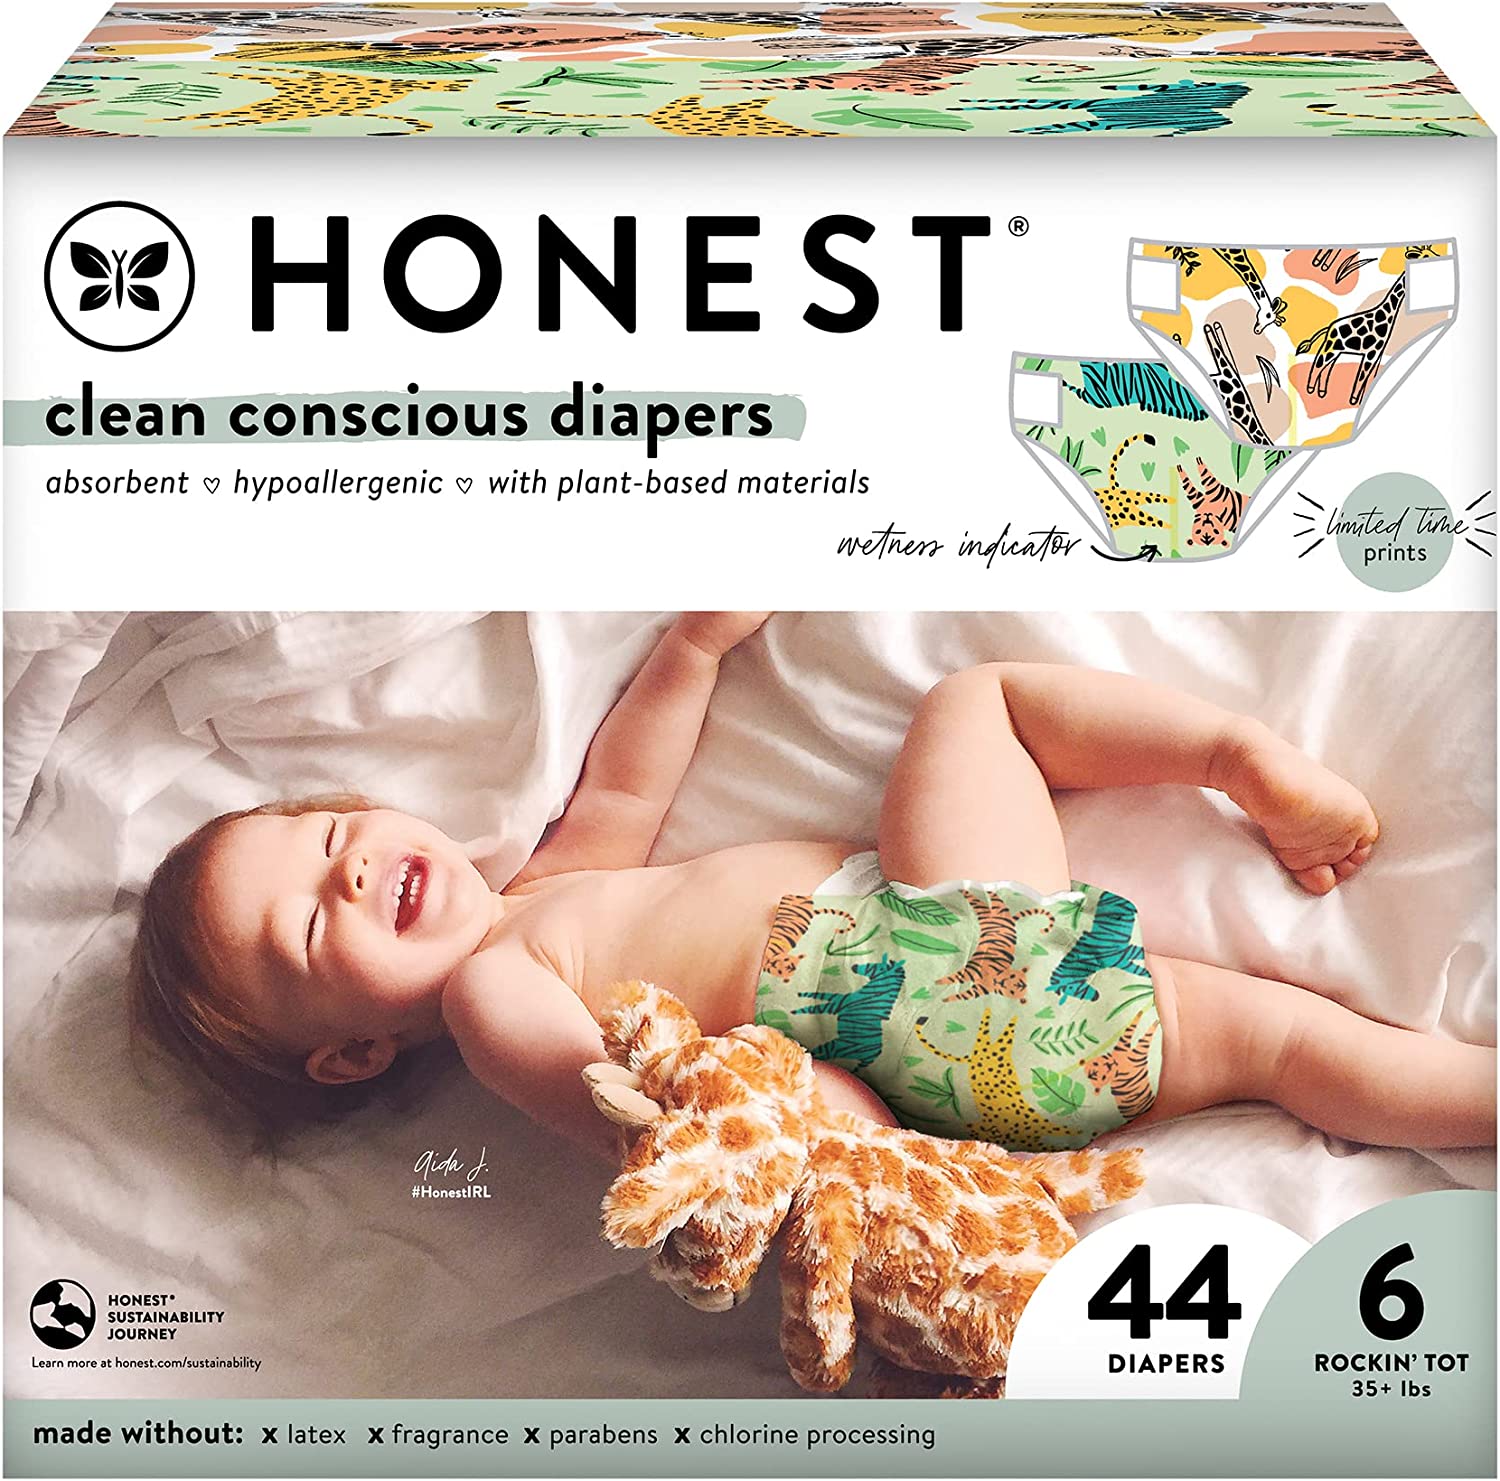 The Honest Company Clean Conscious Diapers | Plant-Based, Sustainable | Stripe Safari & Seeing Spots | Club Box, Size 6 (35+ lbs), 44 Count